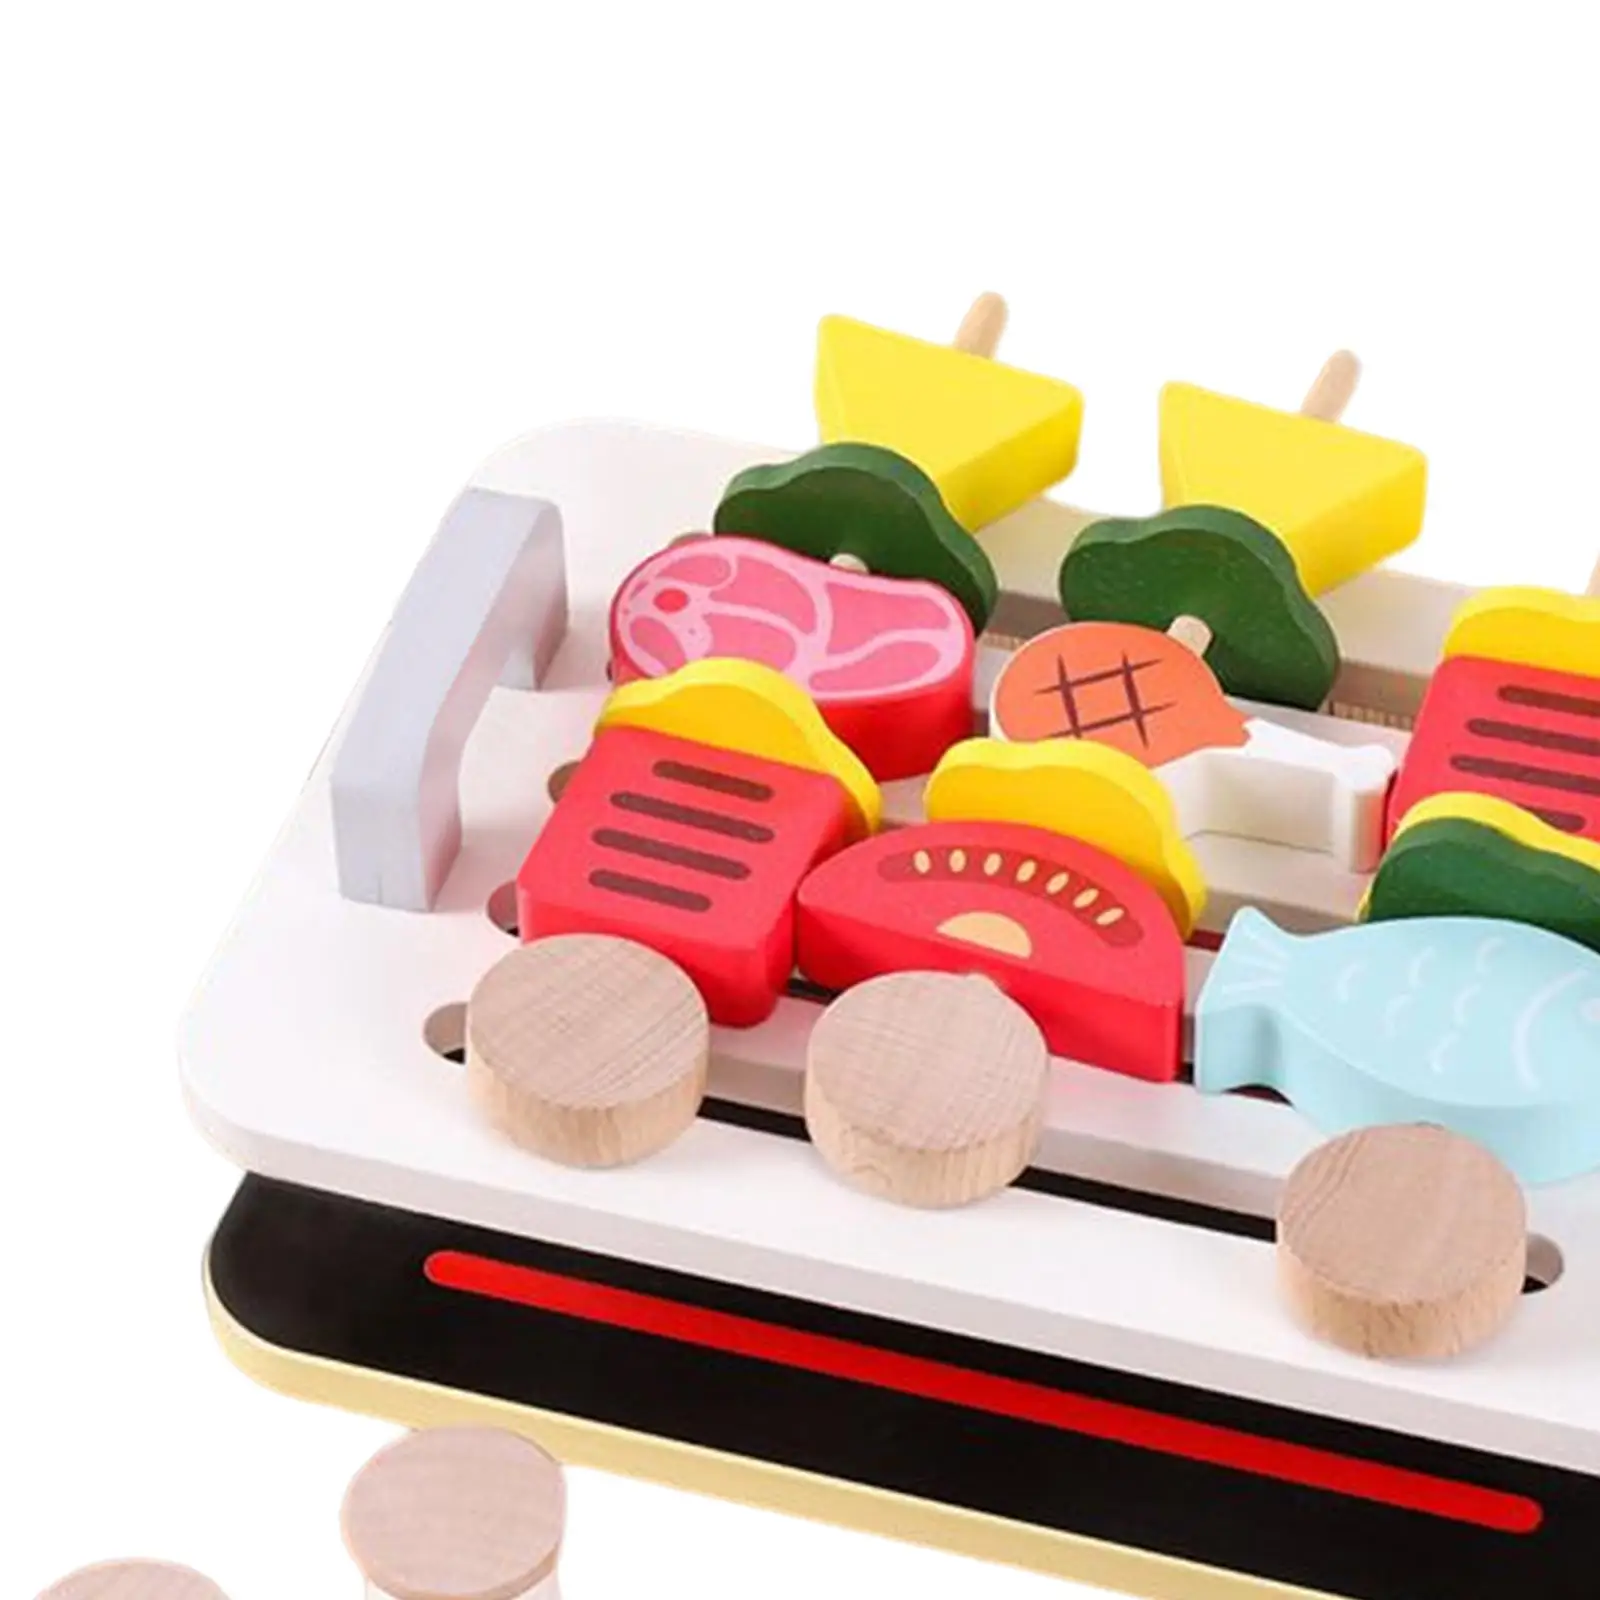 Simulation Wooden Barbecue Playset Indoor Activity Set Educational Cooking toys food Kitchen Toys for Preschool Children Gifts